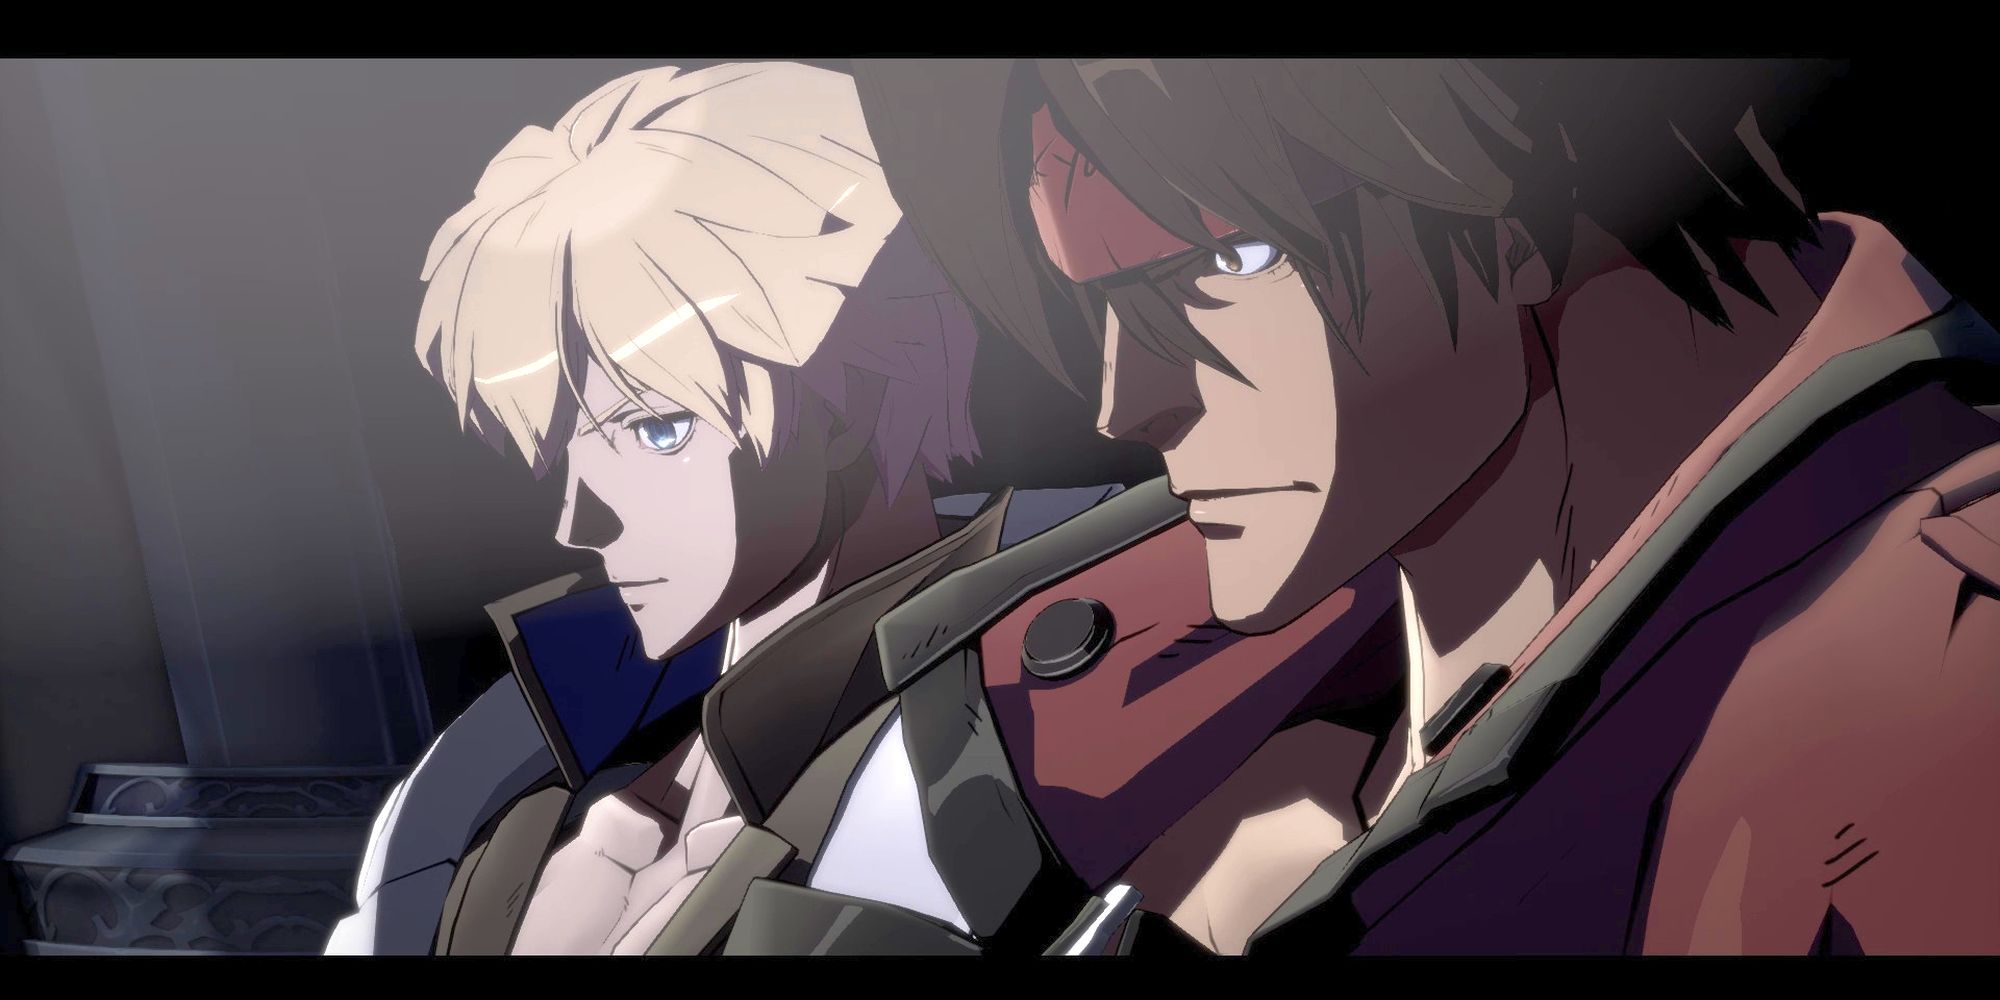 Sol Badguy (foreground) and Ky Kiske in a Guilty Gear Strive cutscene